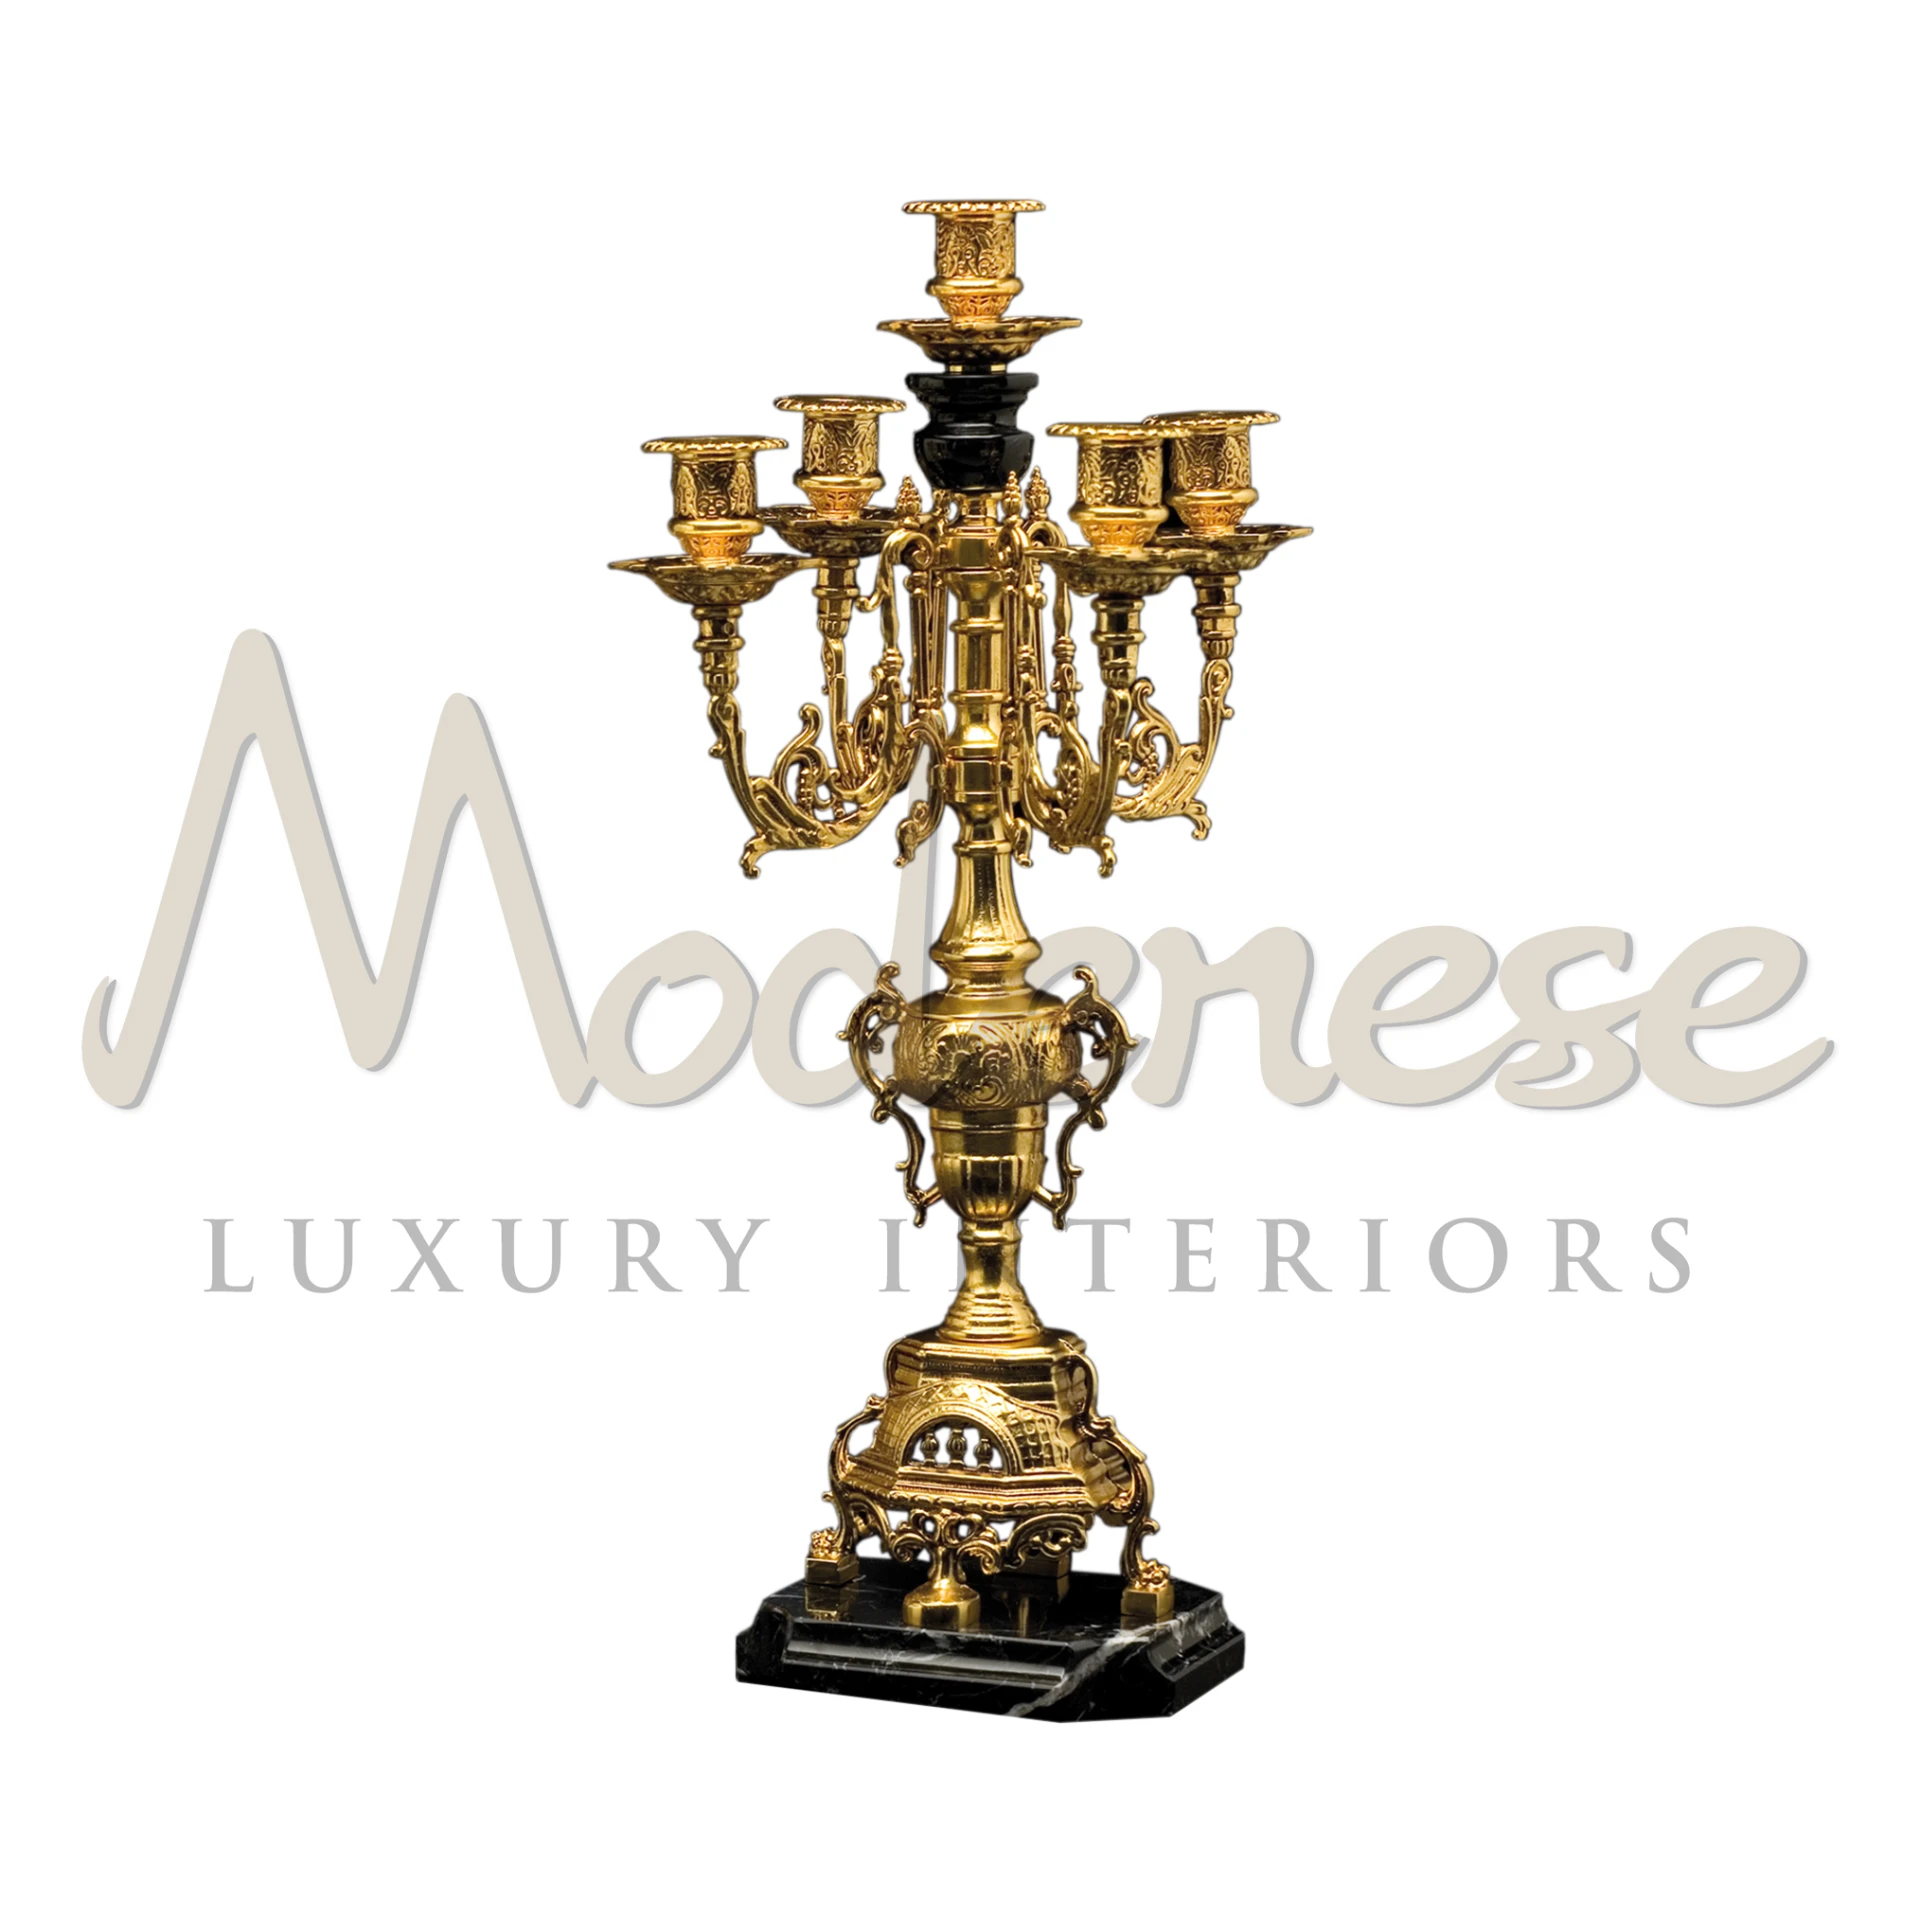 Royal Regency Candelabra with Gold Finish and Nero Marquinia Marble Base